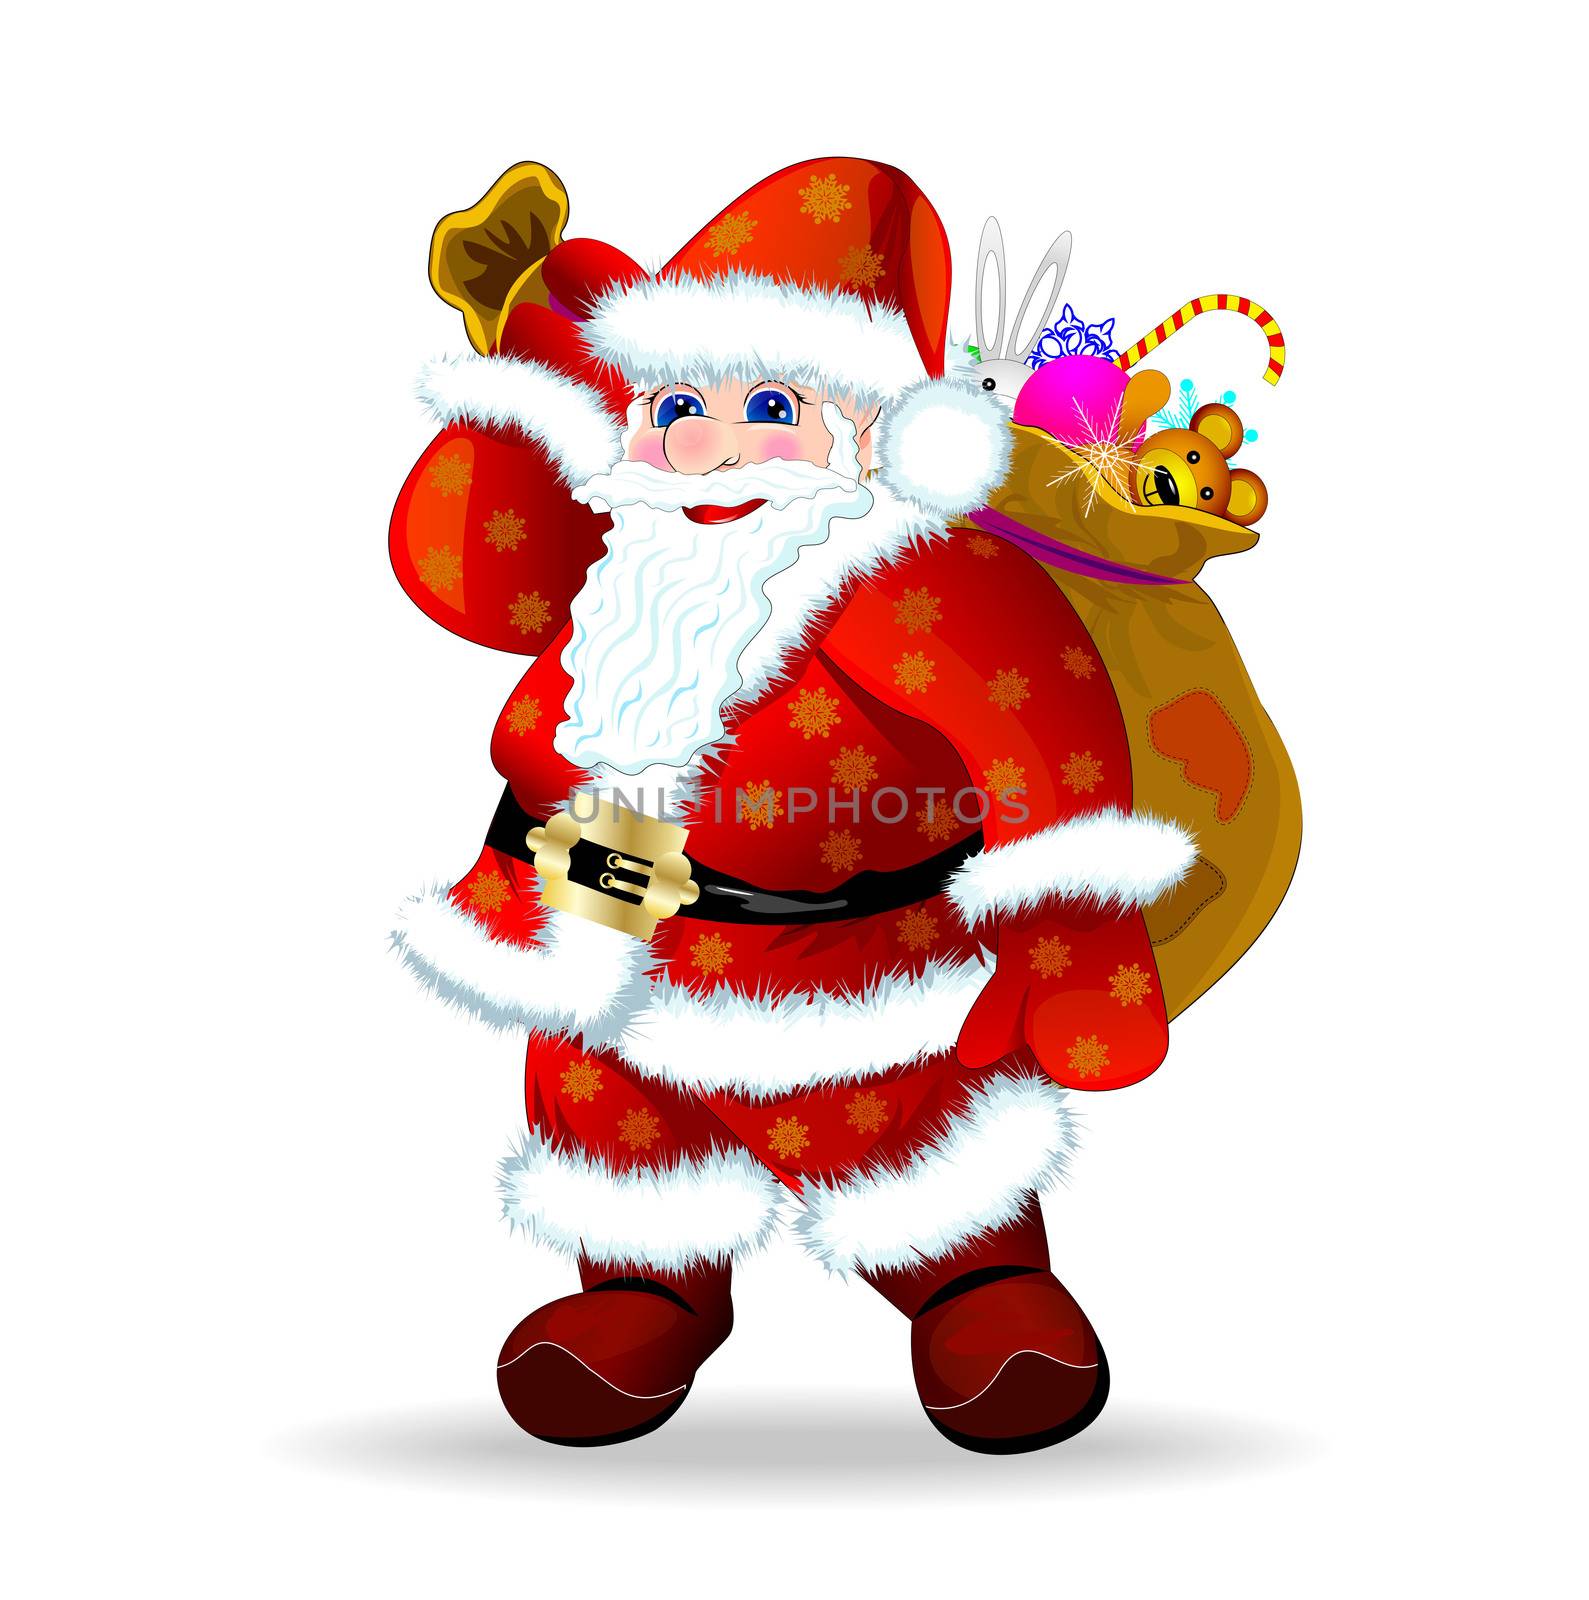 Santa Claus with presents by liolle